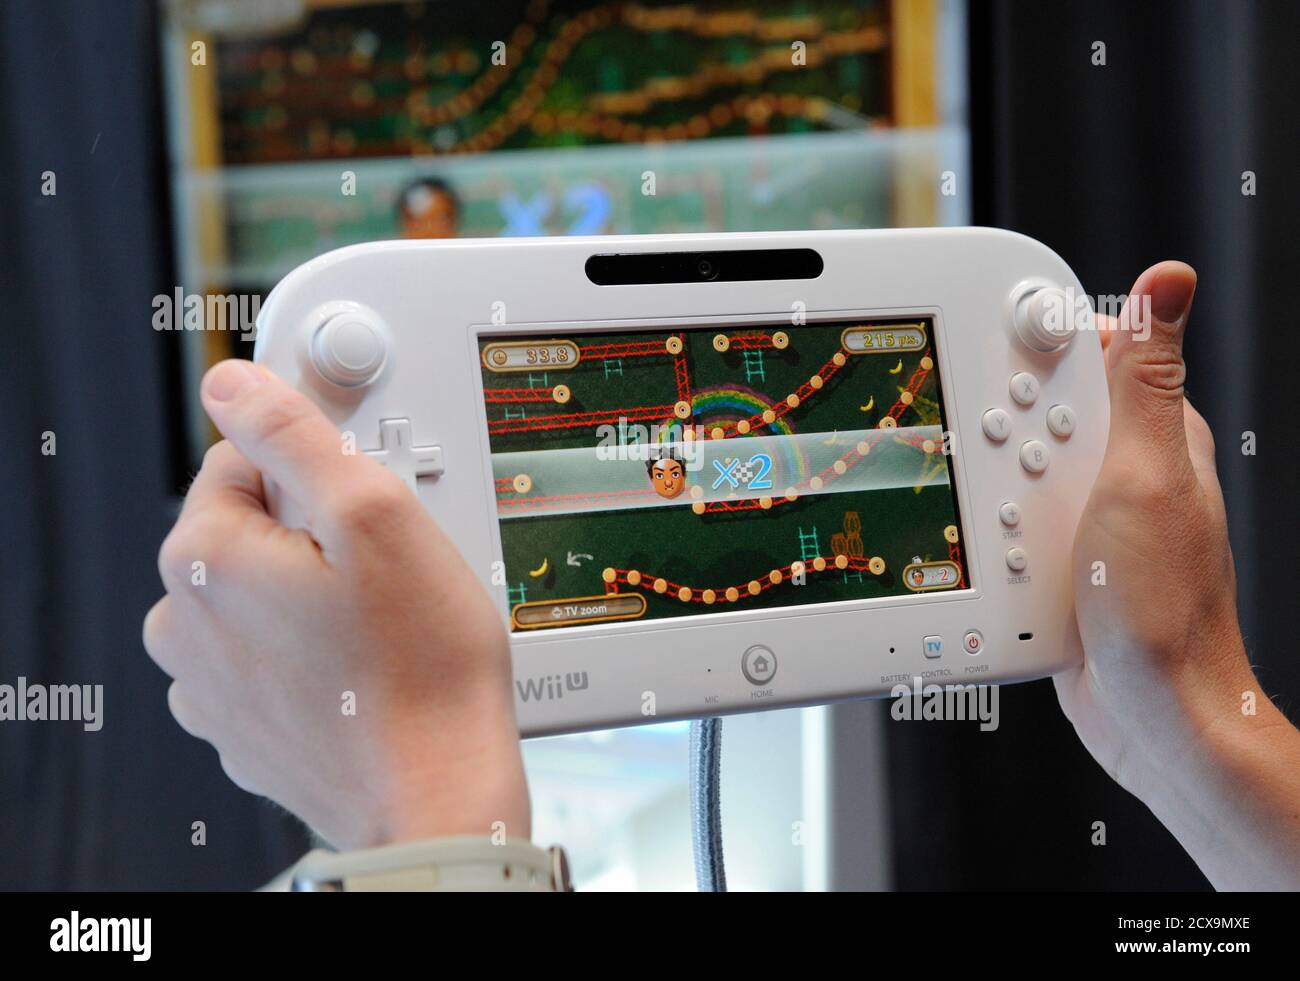 Attendees participate in a demonstration of the new Wii U GamePad and  Console following the Nintendo All-Access Presentation at E3 2012, the  Electronic Entertainment Expo, in Los Angeles June 5, 2012. Nintendo